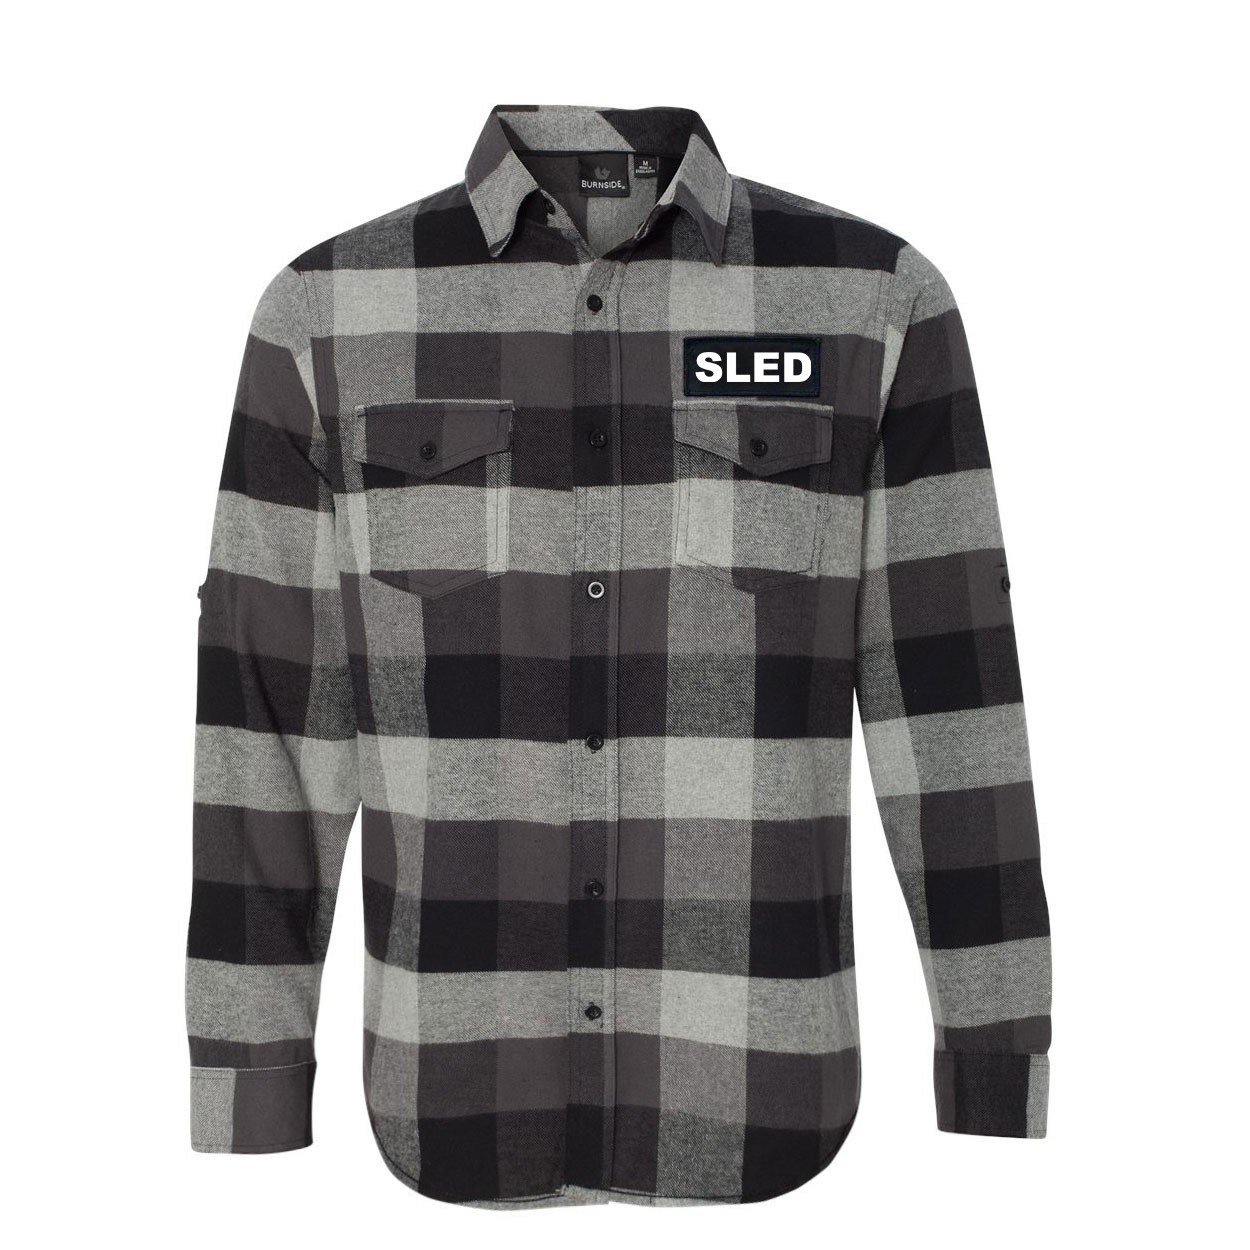 Sled Brand Logo Night Out Rectangle Woven Patch Flannel Shirt Long Sleeve Black/Gray